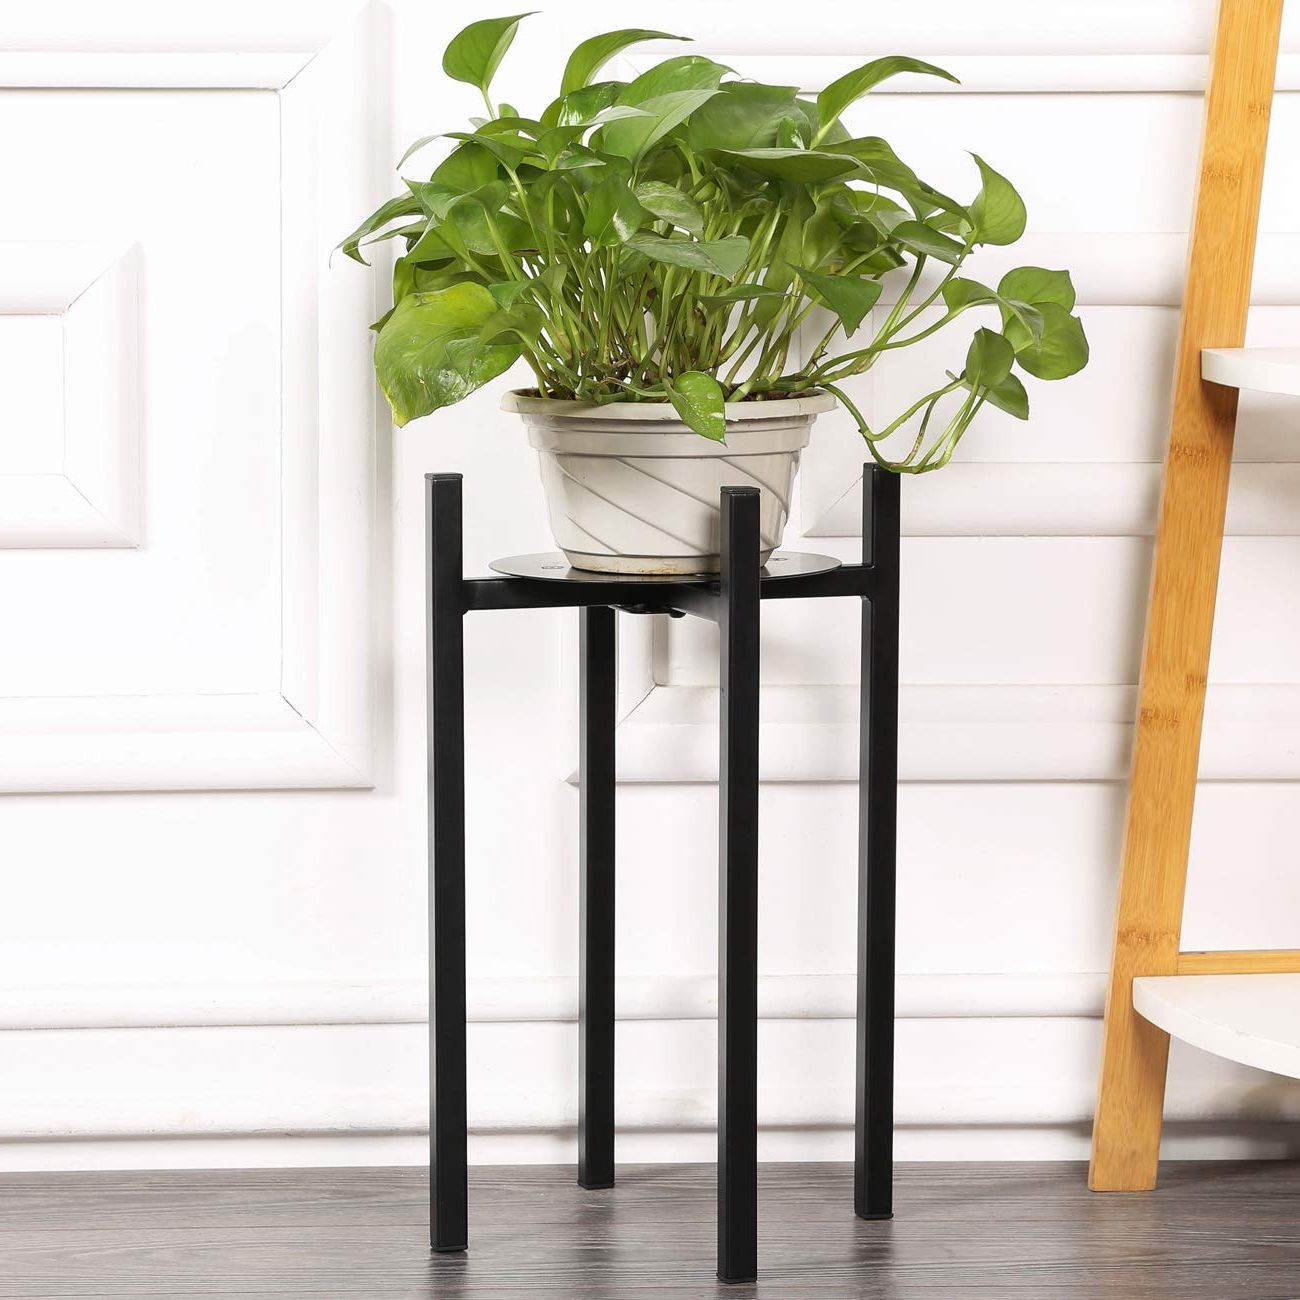 Preferred Medium Plant Stands Inside Amazon : Sunnyglade Plant Stand Metal Potted Plant Holder Sturdy,  Galvanized Steel Pot Stand With Stylish Mid Century Design, Medium For  Indoor, Outdoor House, Garden & Patio (15" High) : Patio, Lawn & (View 5 of 15)